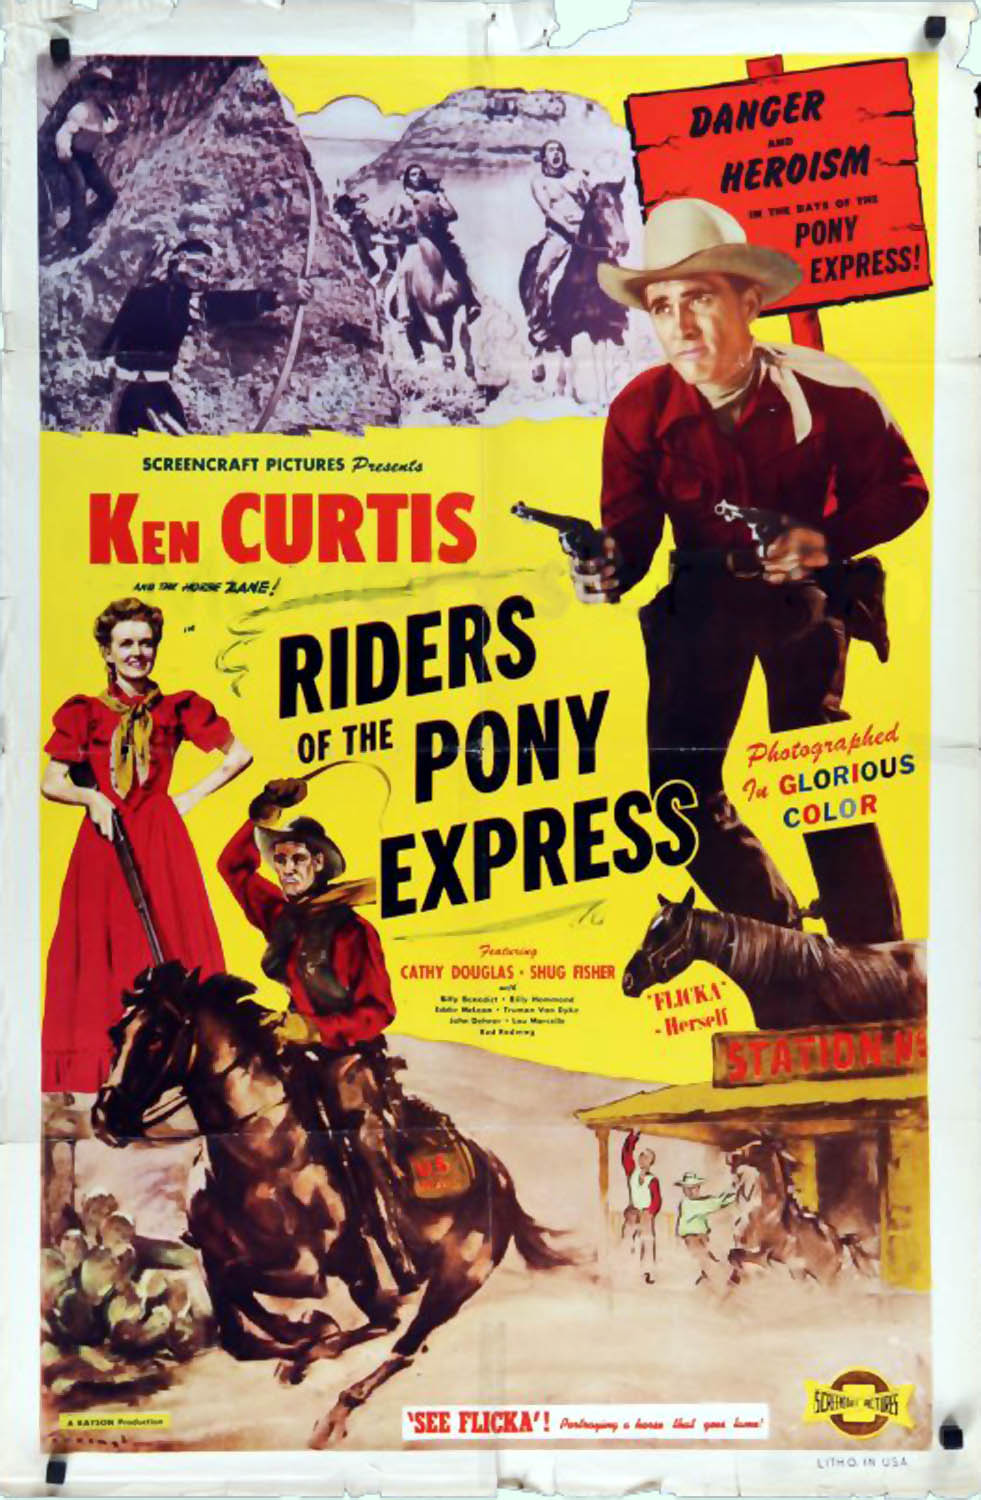 RIDERS OF THE PONY EXPRESS